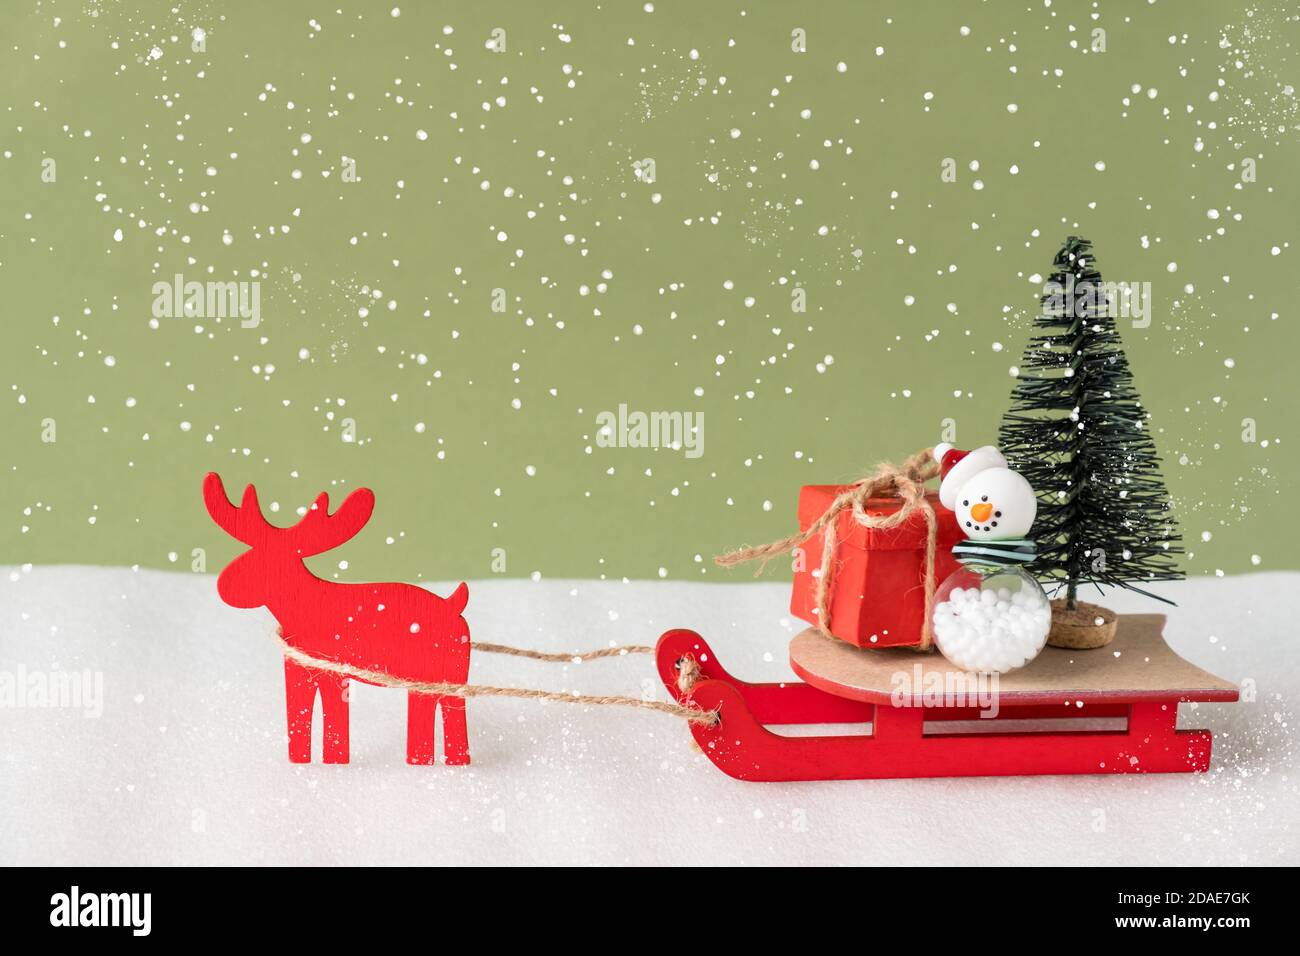 Toy reindeer and sleigh delivering Christmas present and tree on green background. Stock Photo